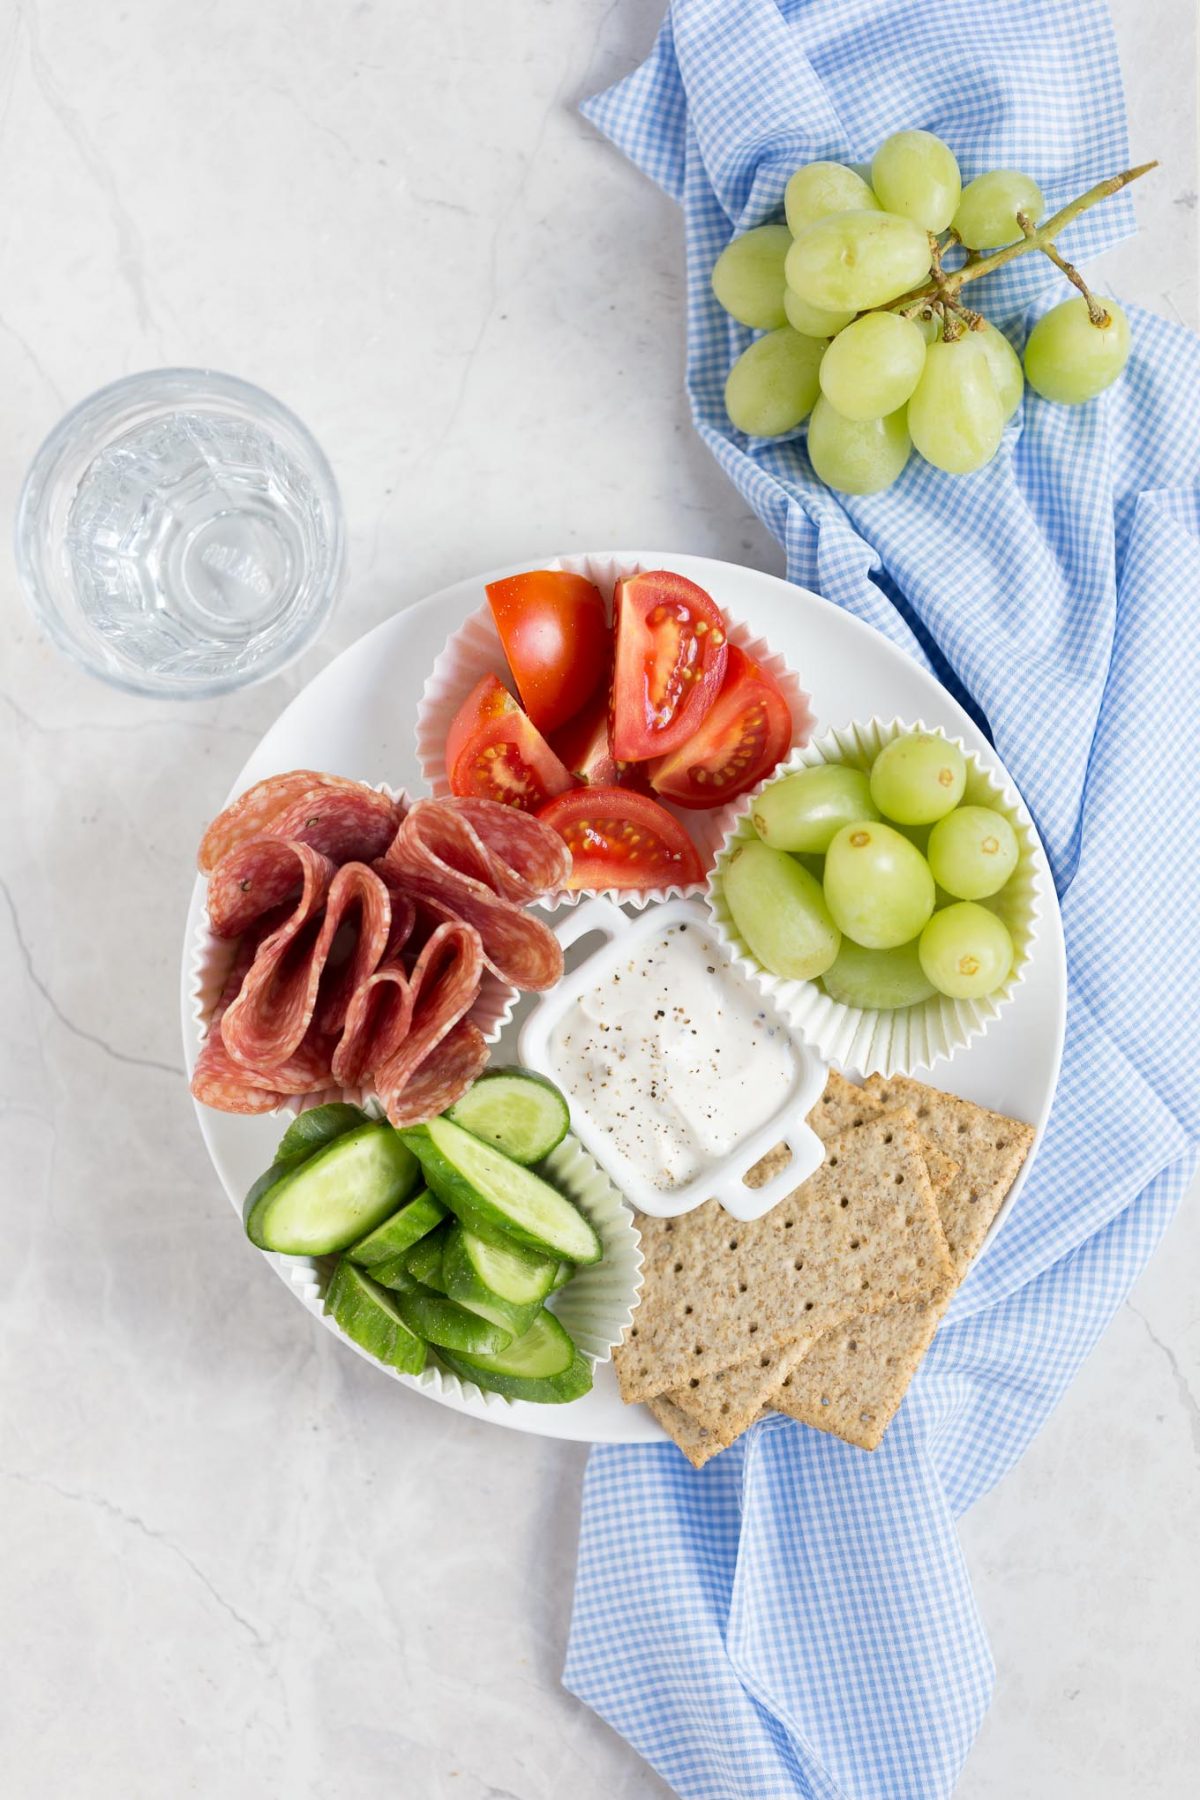 Adult Lunchable! Make your own delicious, healthy lunchable with salami (any deli meat), Arla cream cheese, sliced vegetables, and crackers! Great for a kid friendly school lunch 